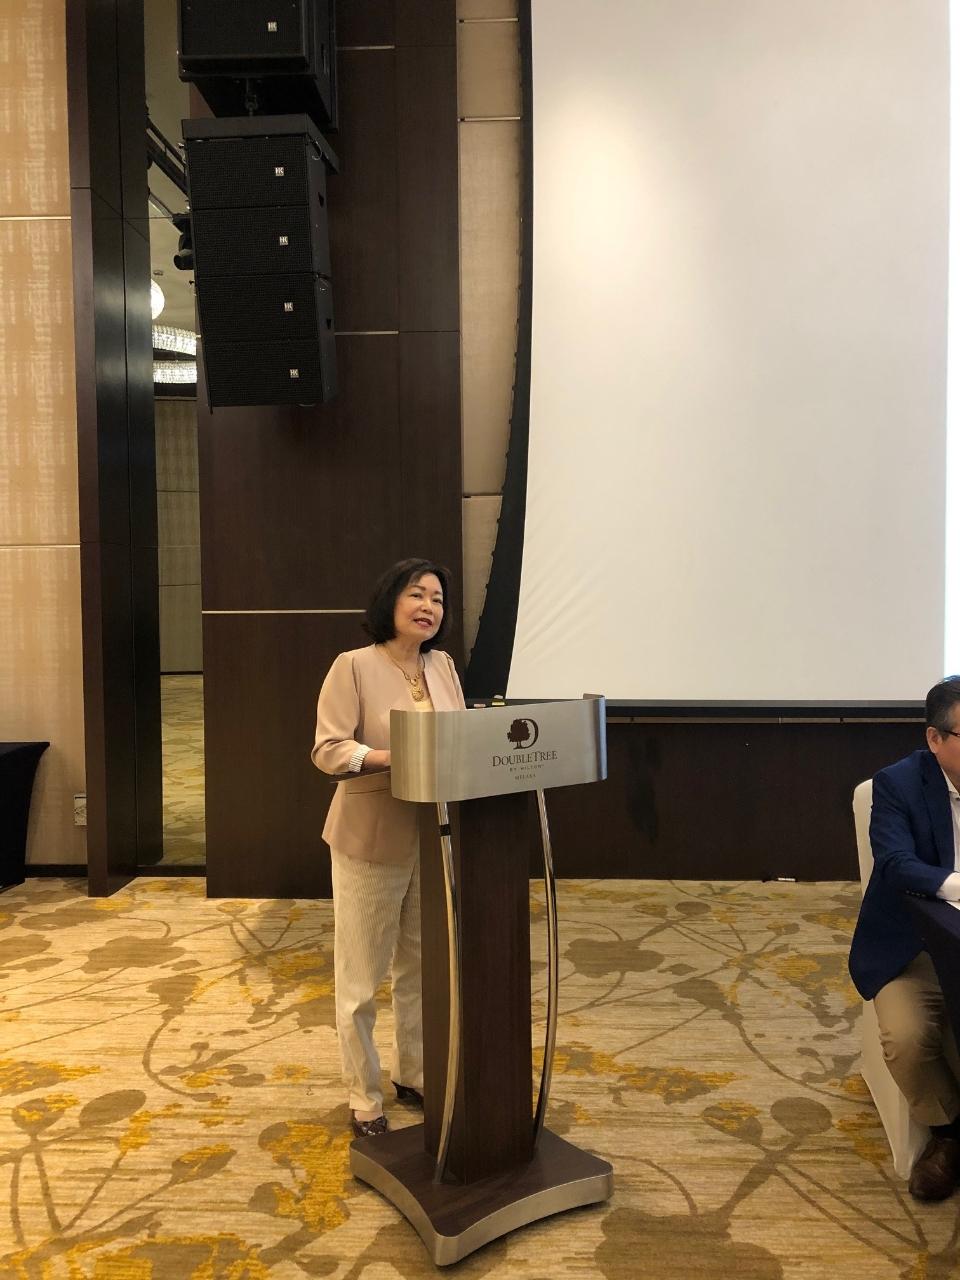 Representative Anne Hung calls on international community to support Taiwan's participation in World Health Organization and World Health Assembly